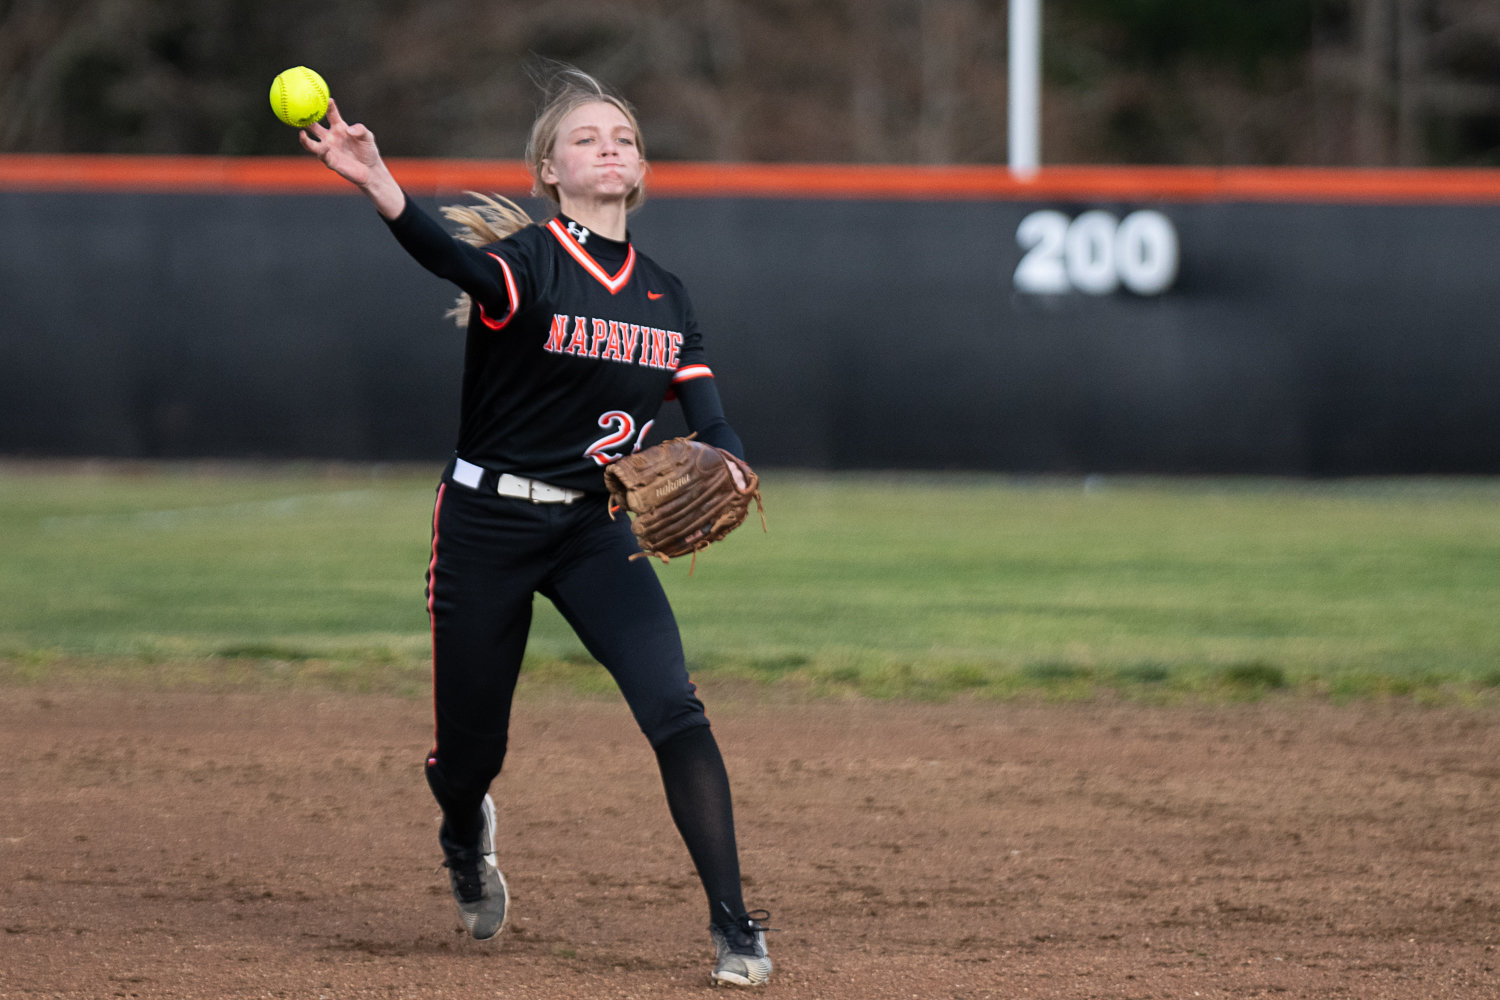 Taylen Evander throws to first during Napavine's game against Elma on March 20.